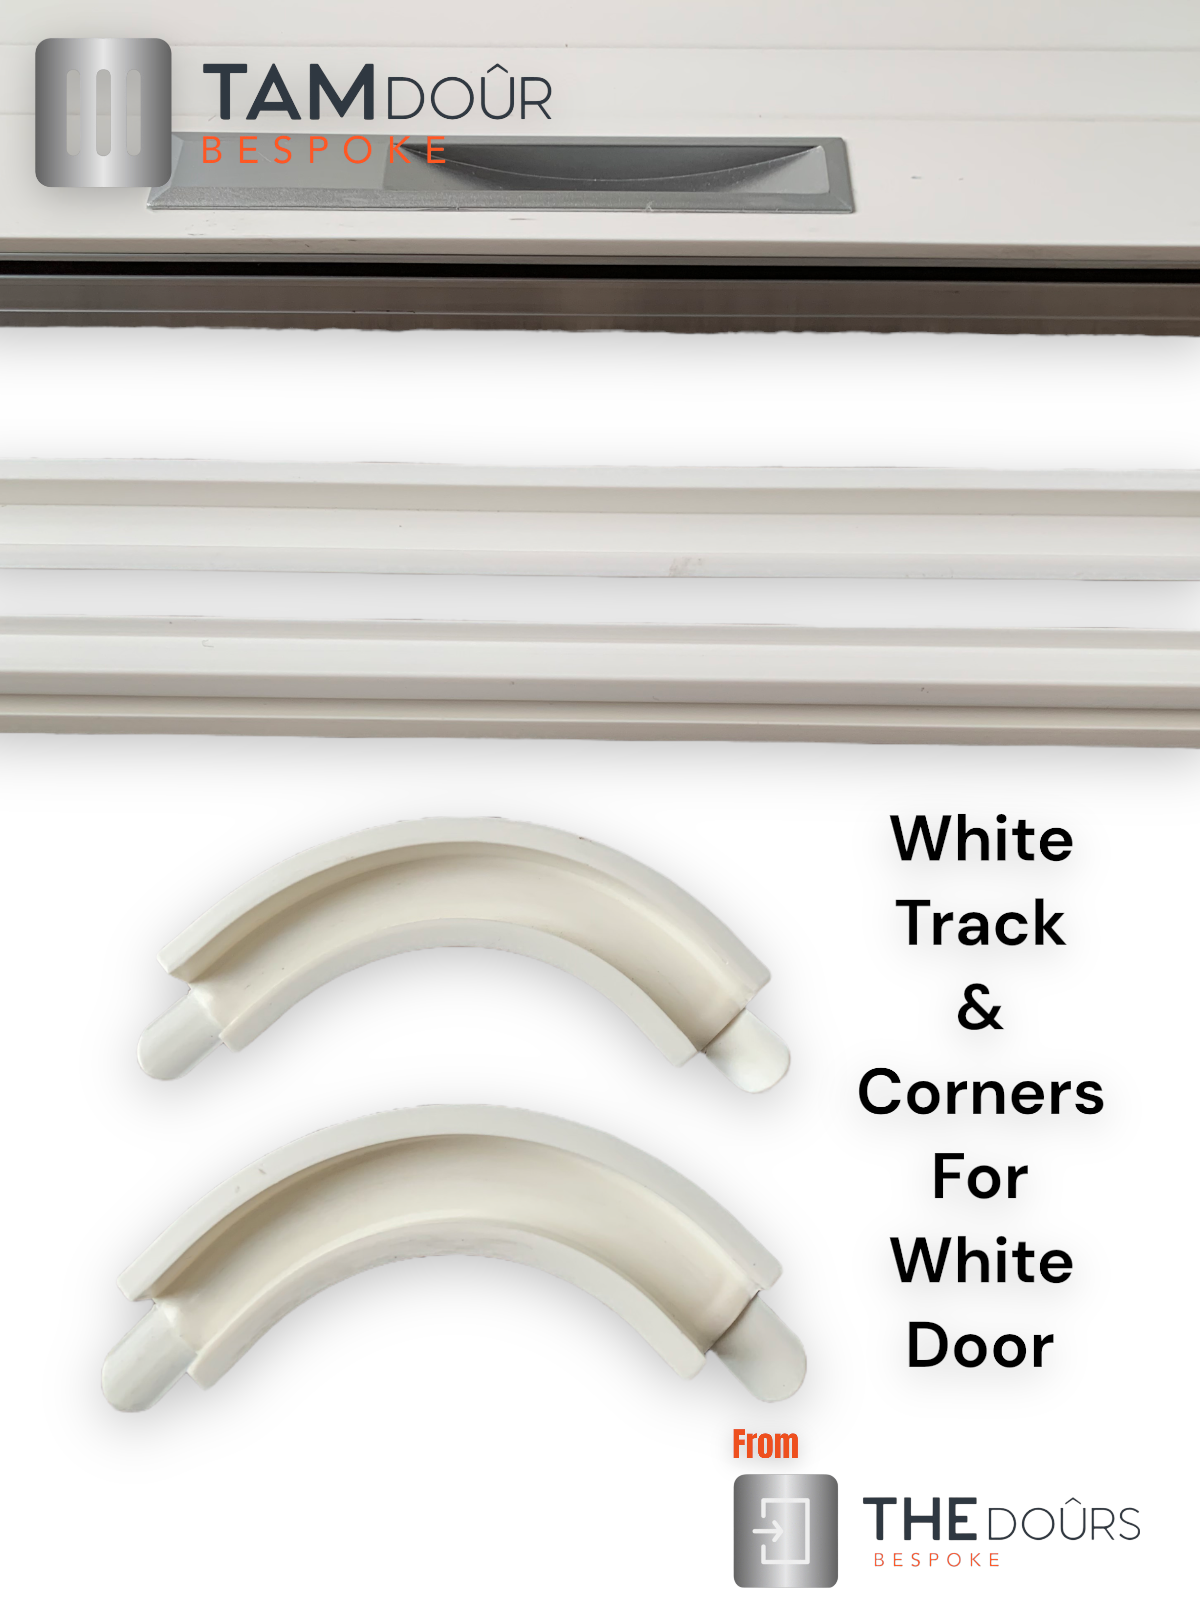 Tambour White Door kit - SLIVER HANDLE 1500mm to 2000mm tall